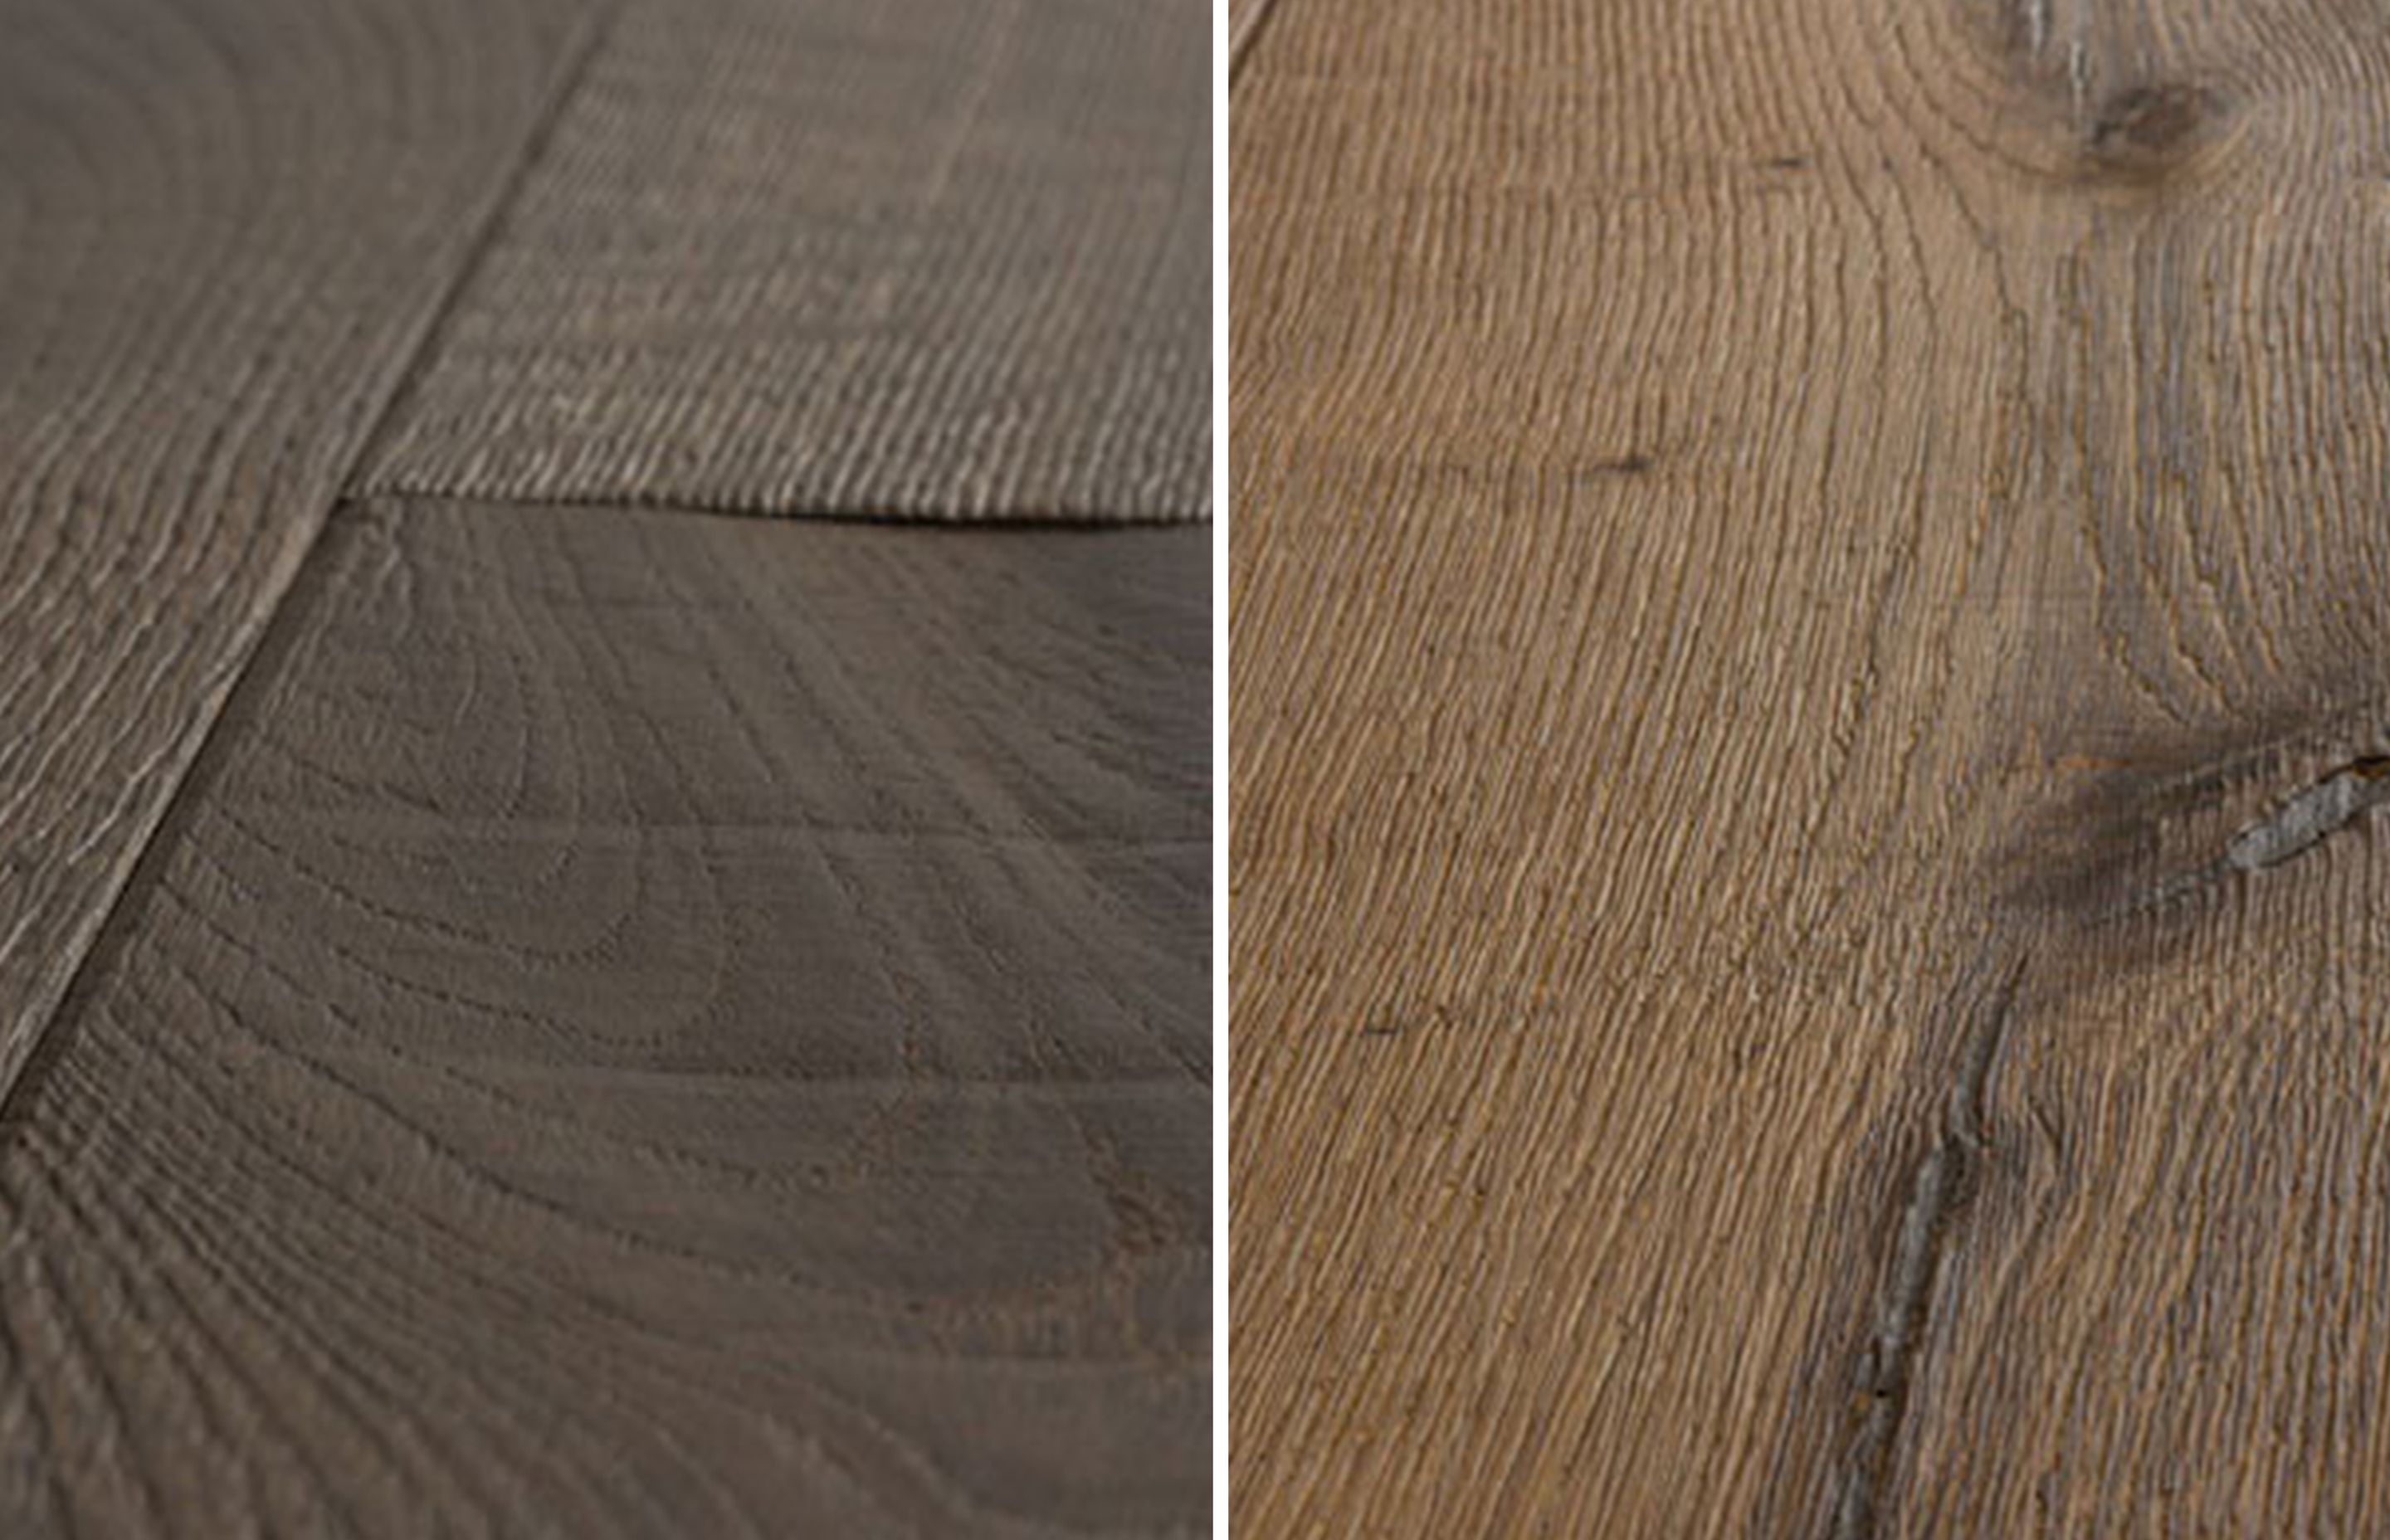 Bold 'brushstrokes' and a play of light and shadow across the surface are hallmarks of the Artiste Collection, which has been designed to celebrate the natural beauty of smoked oak.